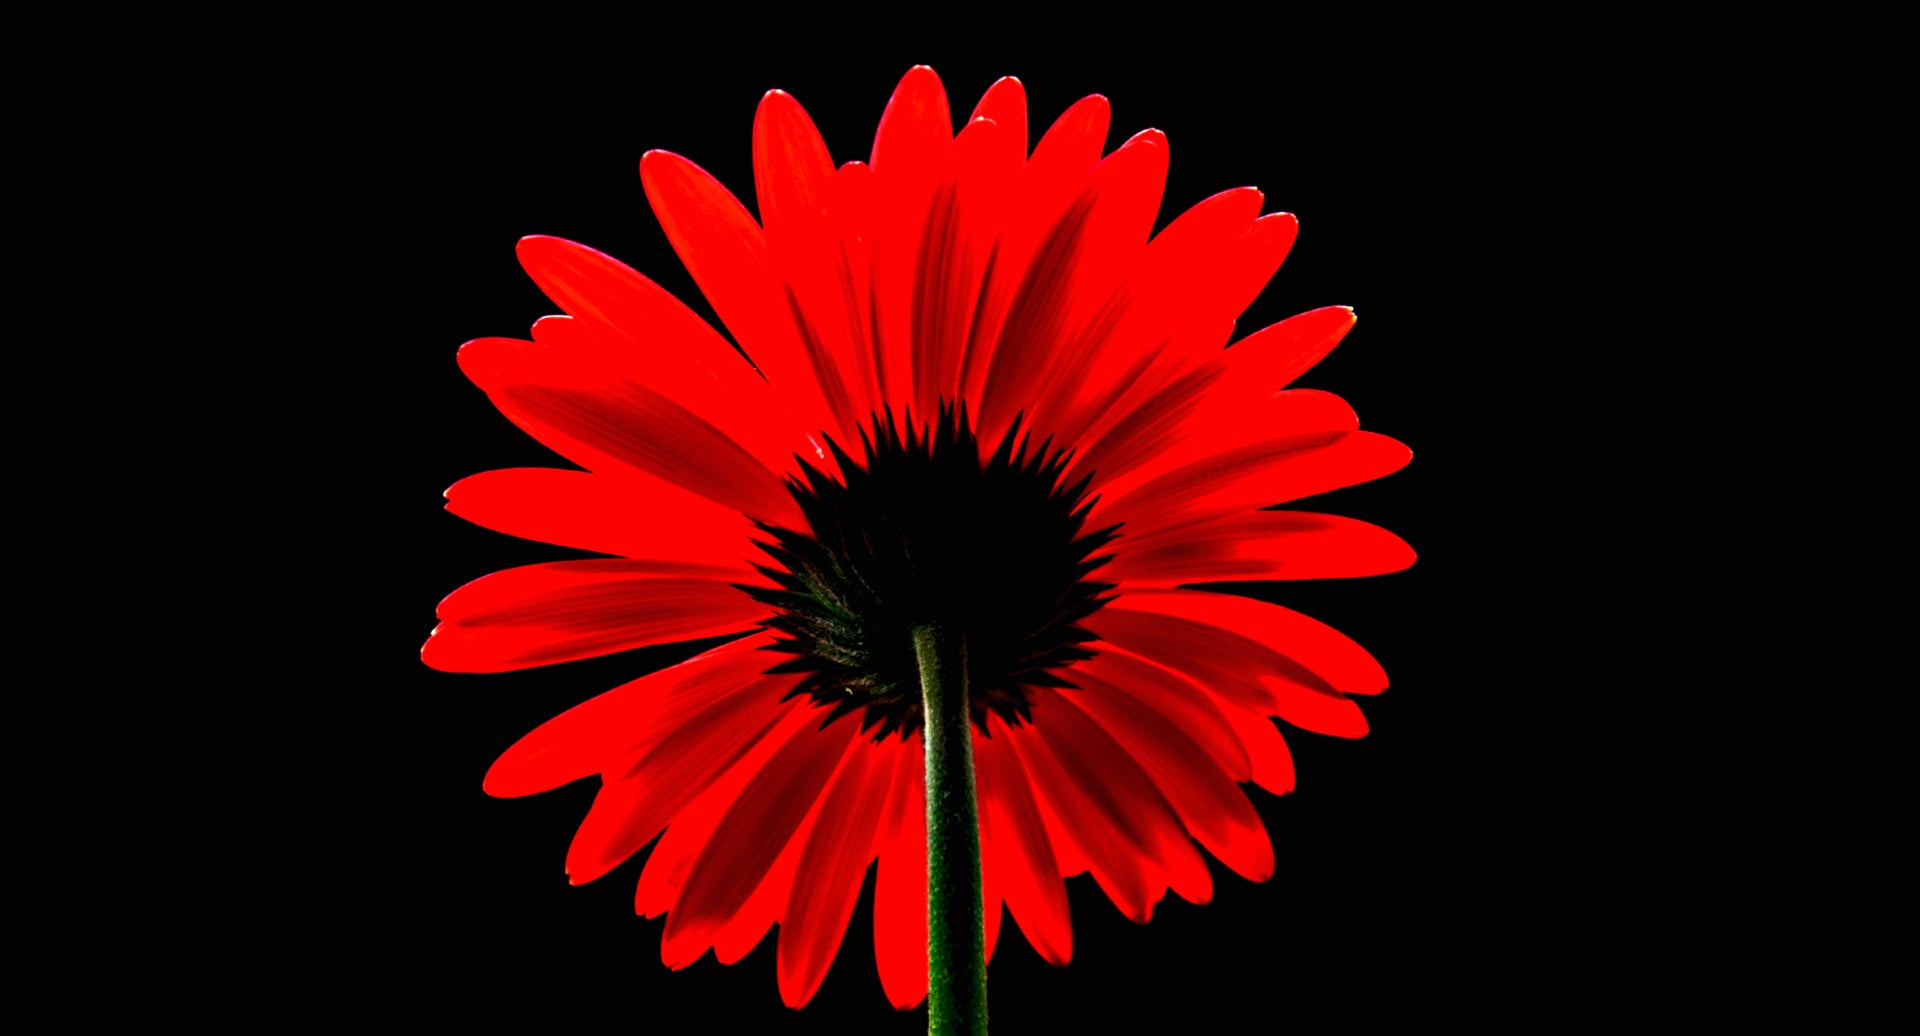 Red Gerbera Daisy wallpapers HD quality